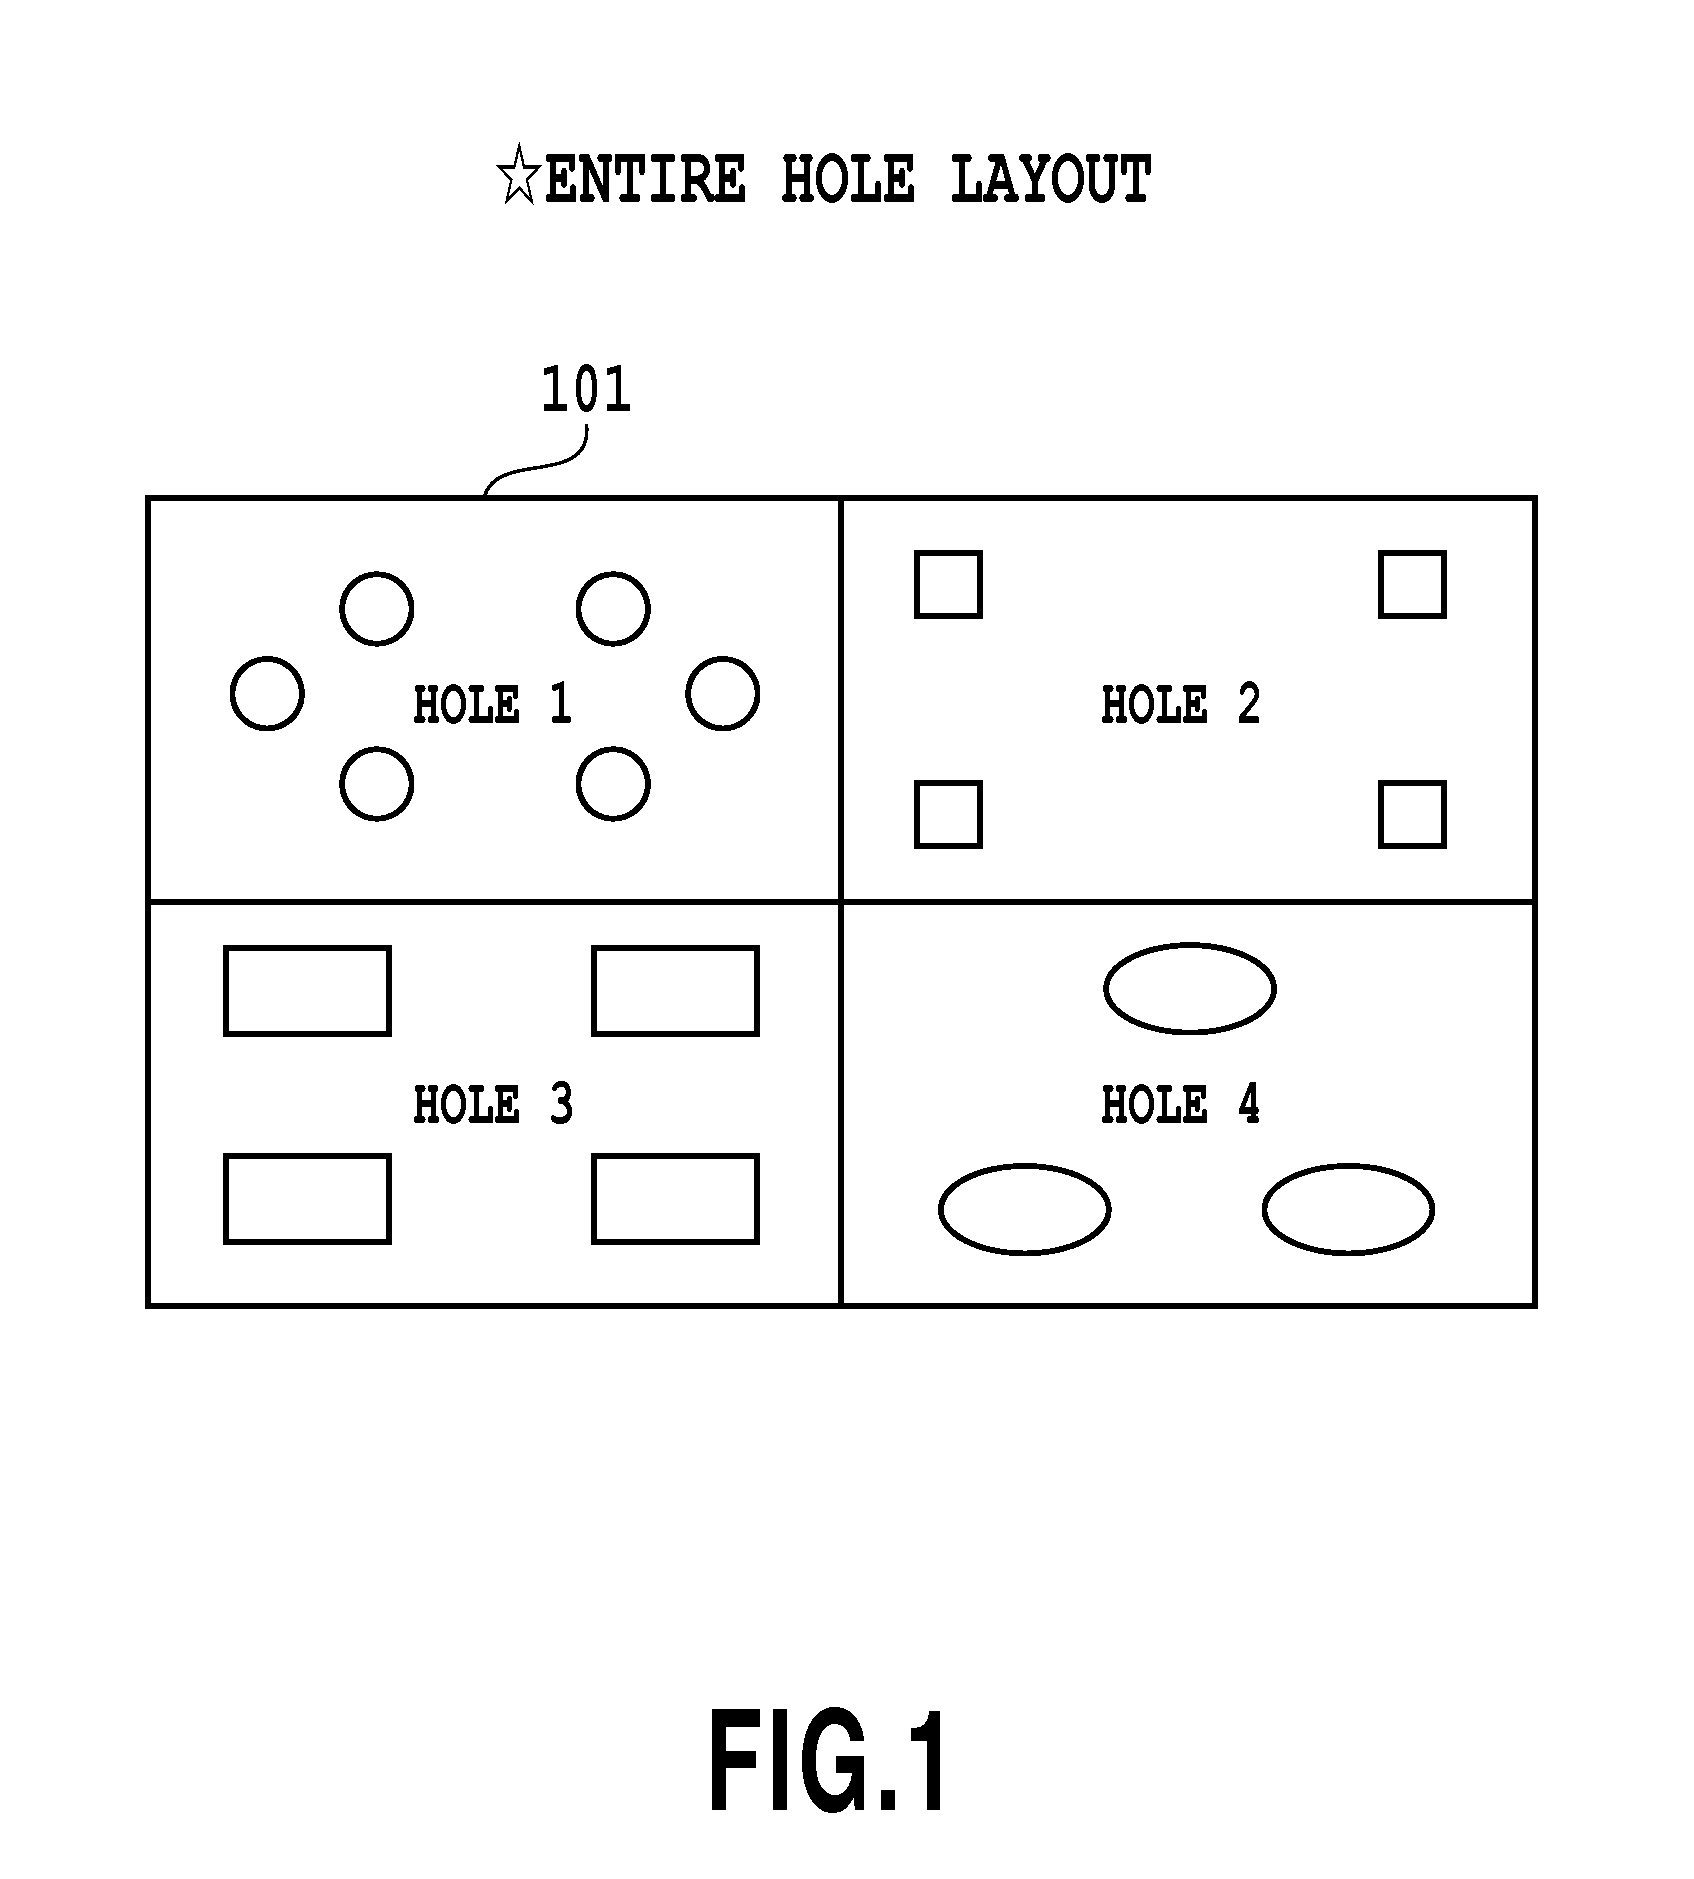 Image processor and image processing method processing an image that includes a semi-transparent object or an image with periodically varying density